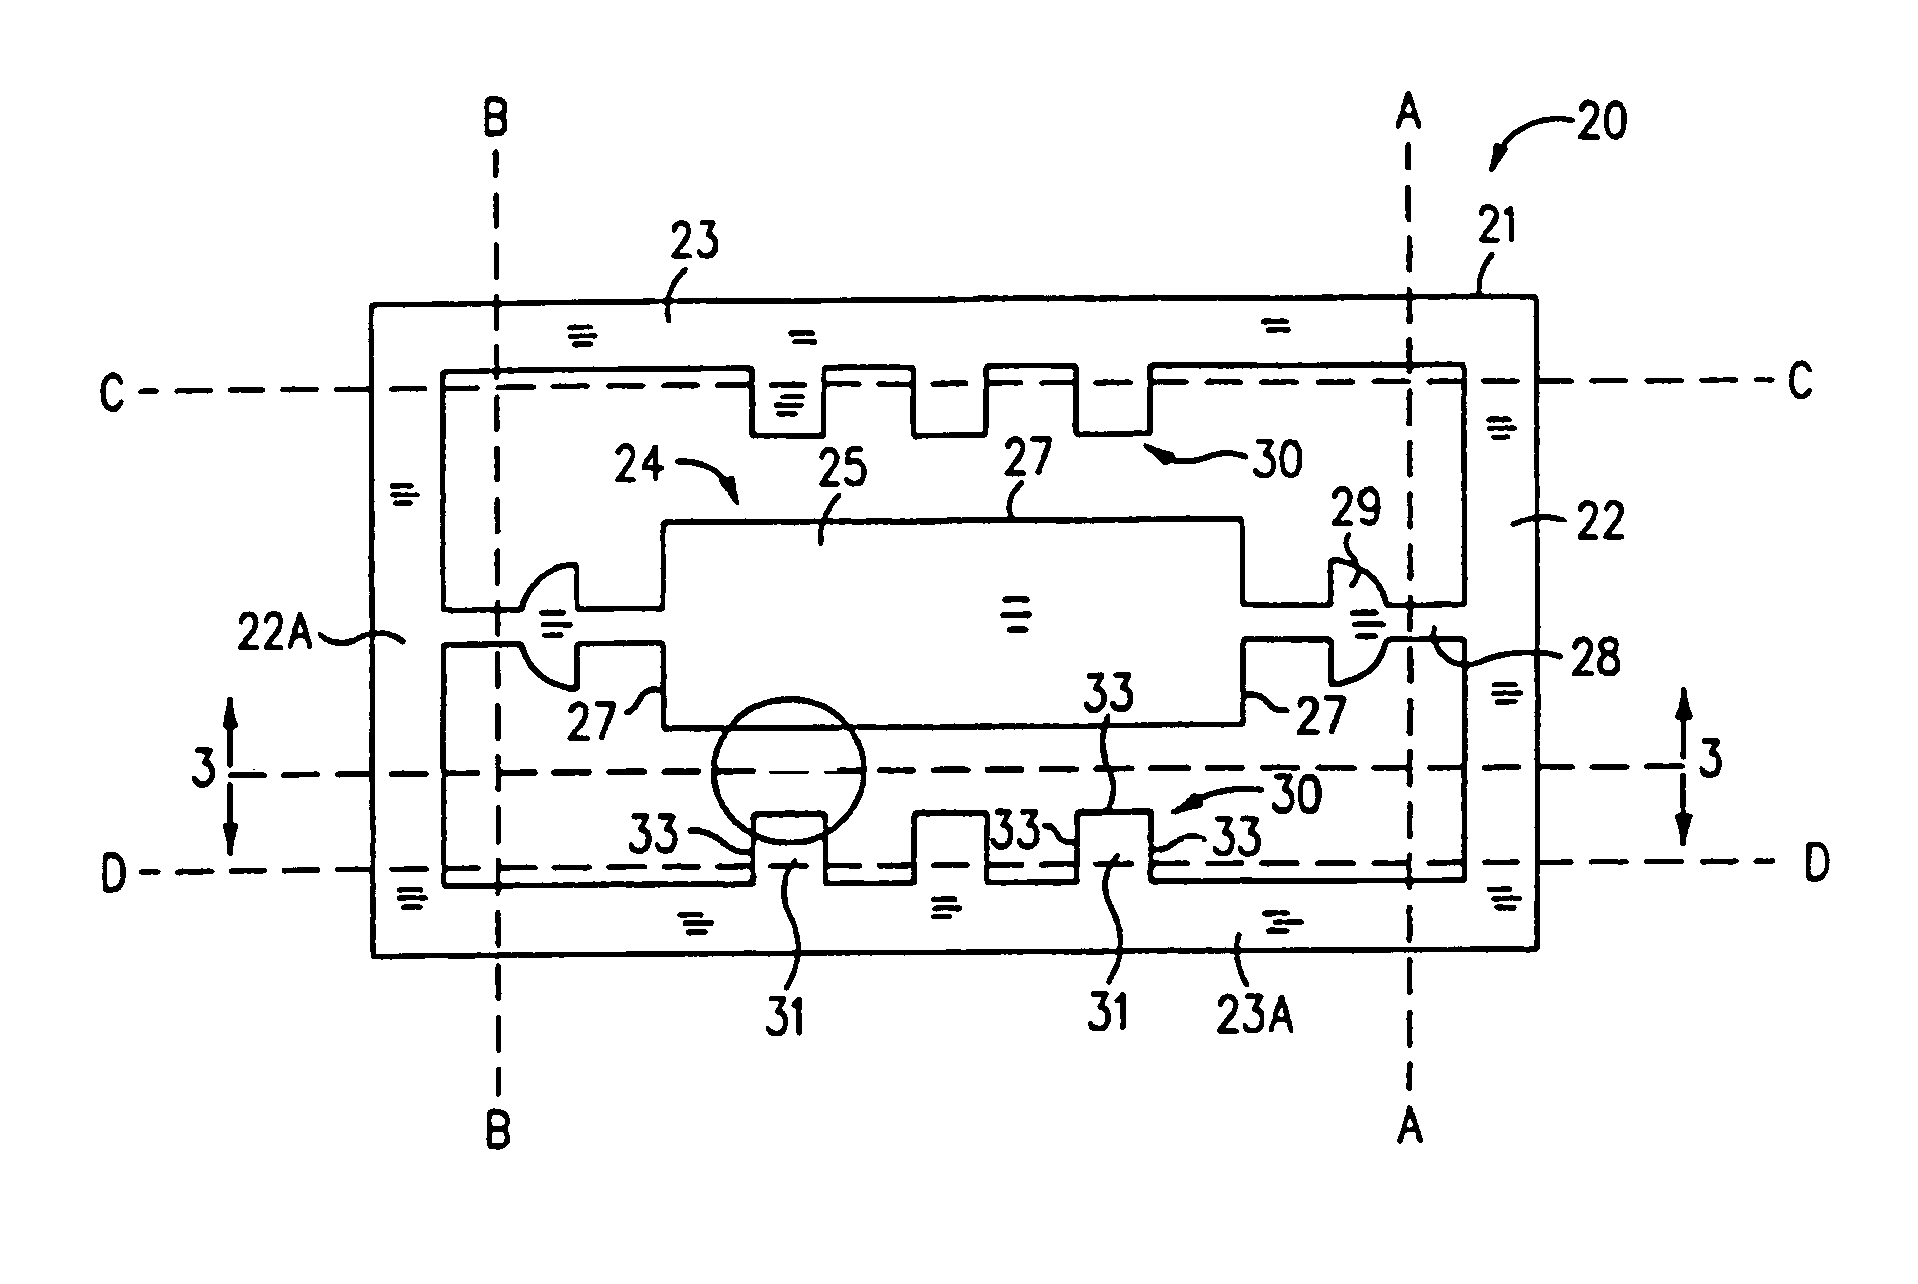 Method of making an integrated circuit package